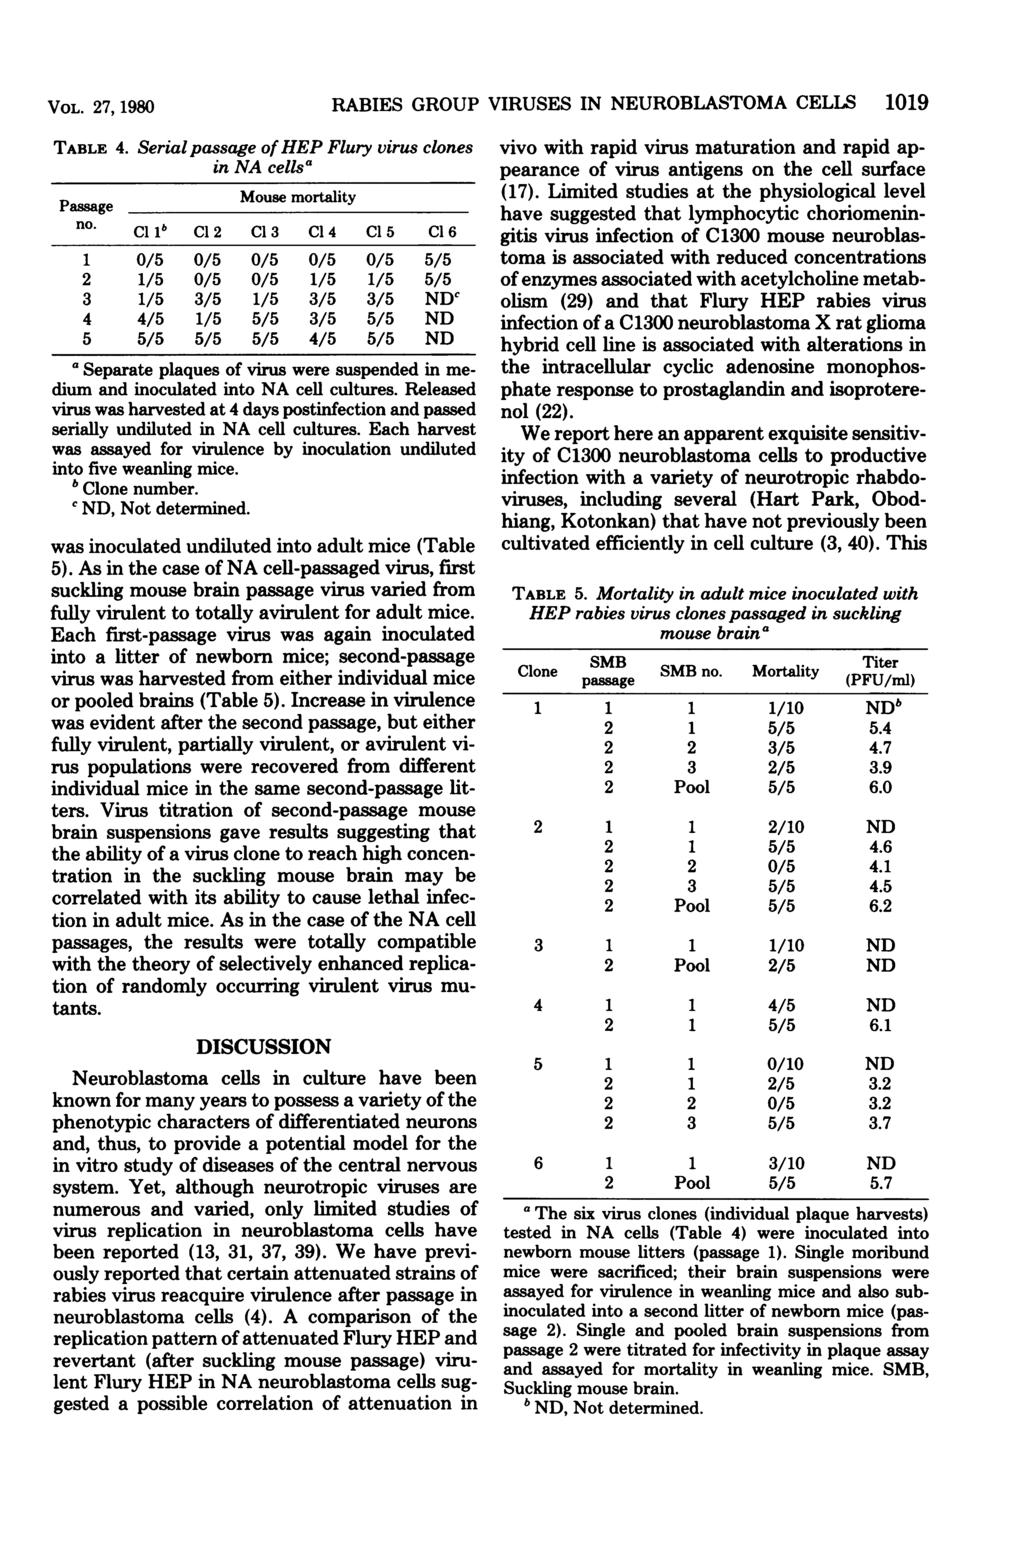 VOL. 7, 1980 TABLE 4. Passage Serial passage of HEP Flury virus clones in NA cellsa Mouse mortality no.